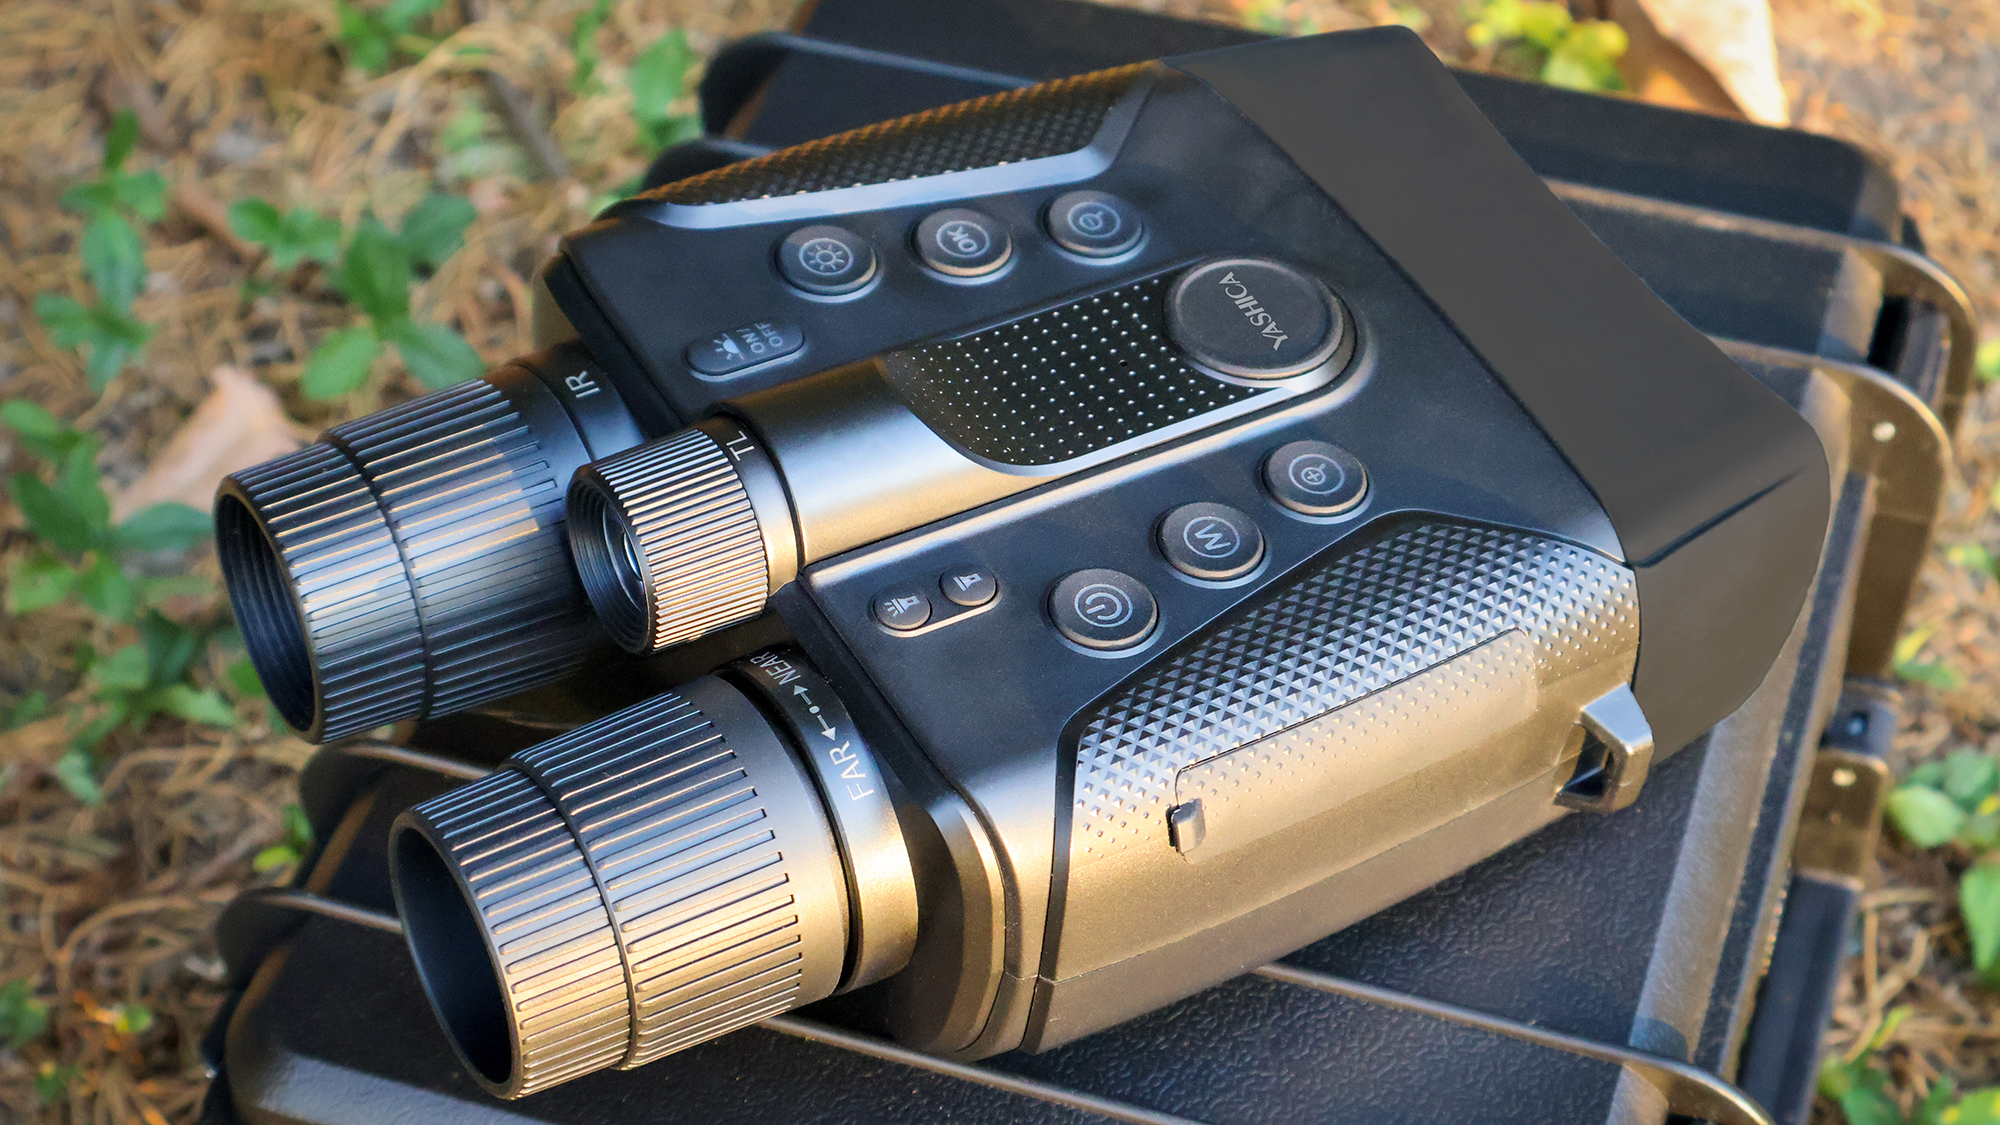 Yashica Night Vision binoculars resting on a pelicase in sunlight